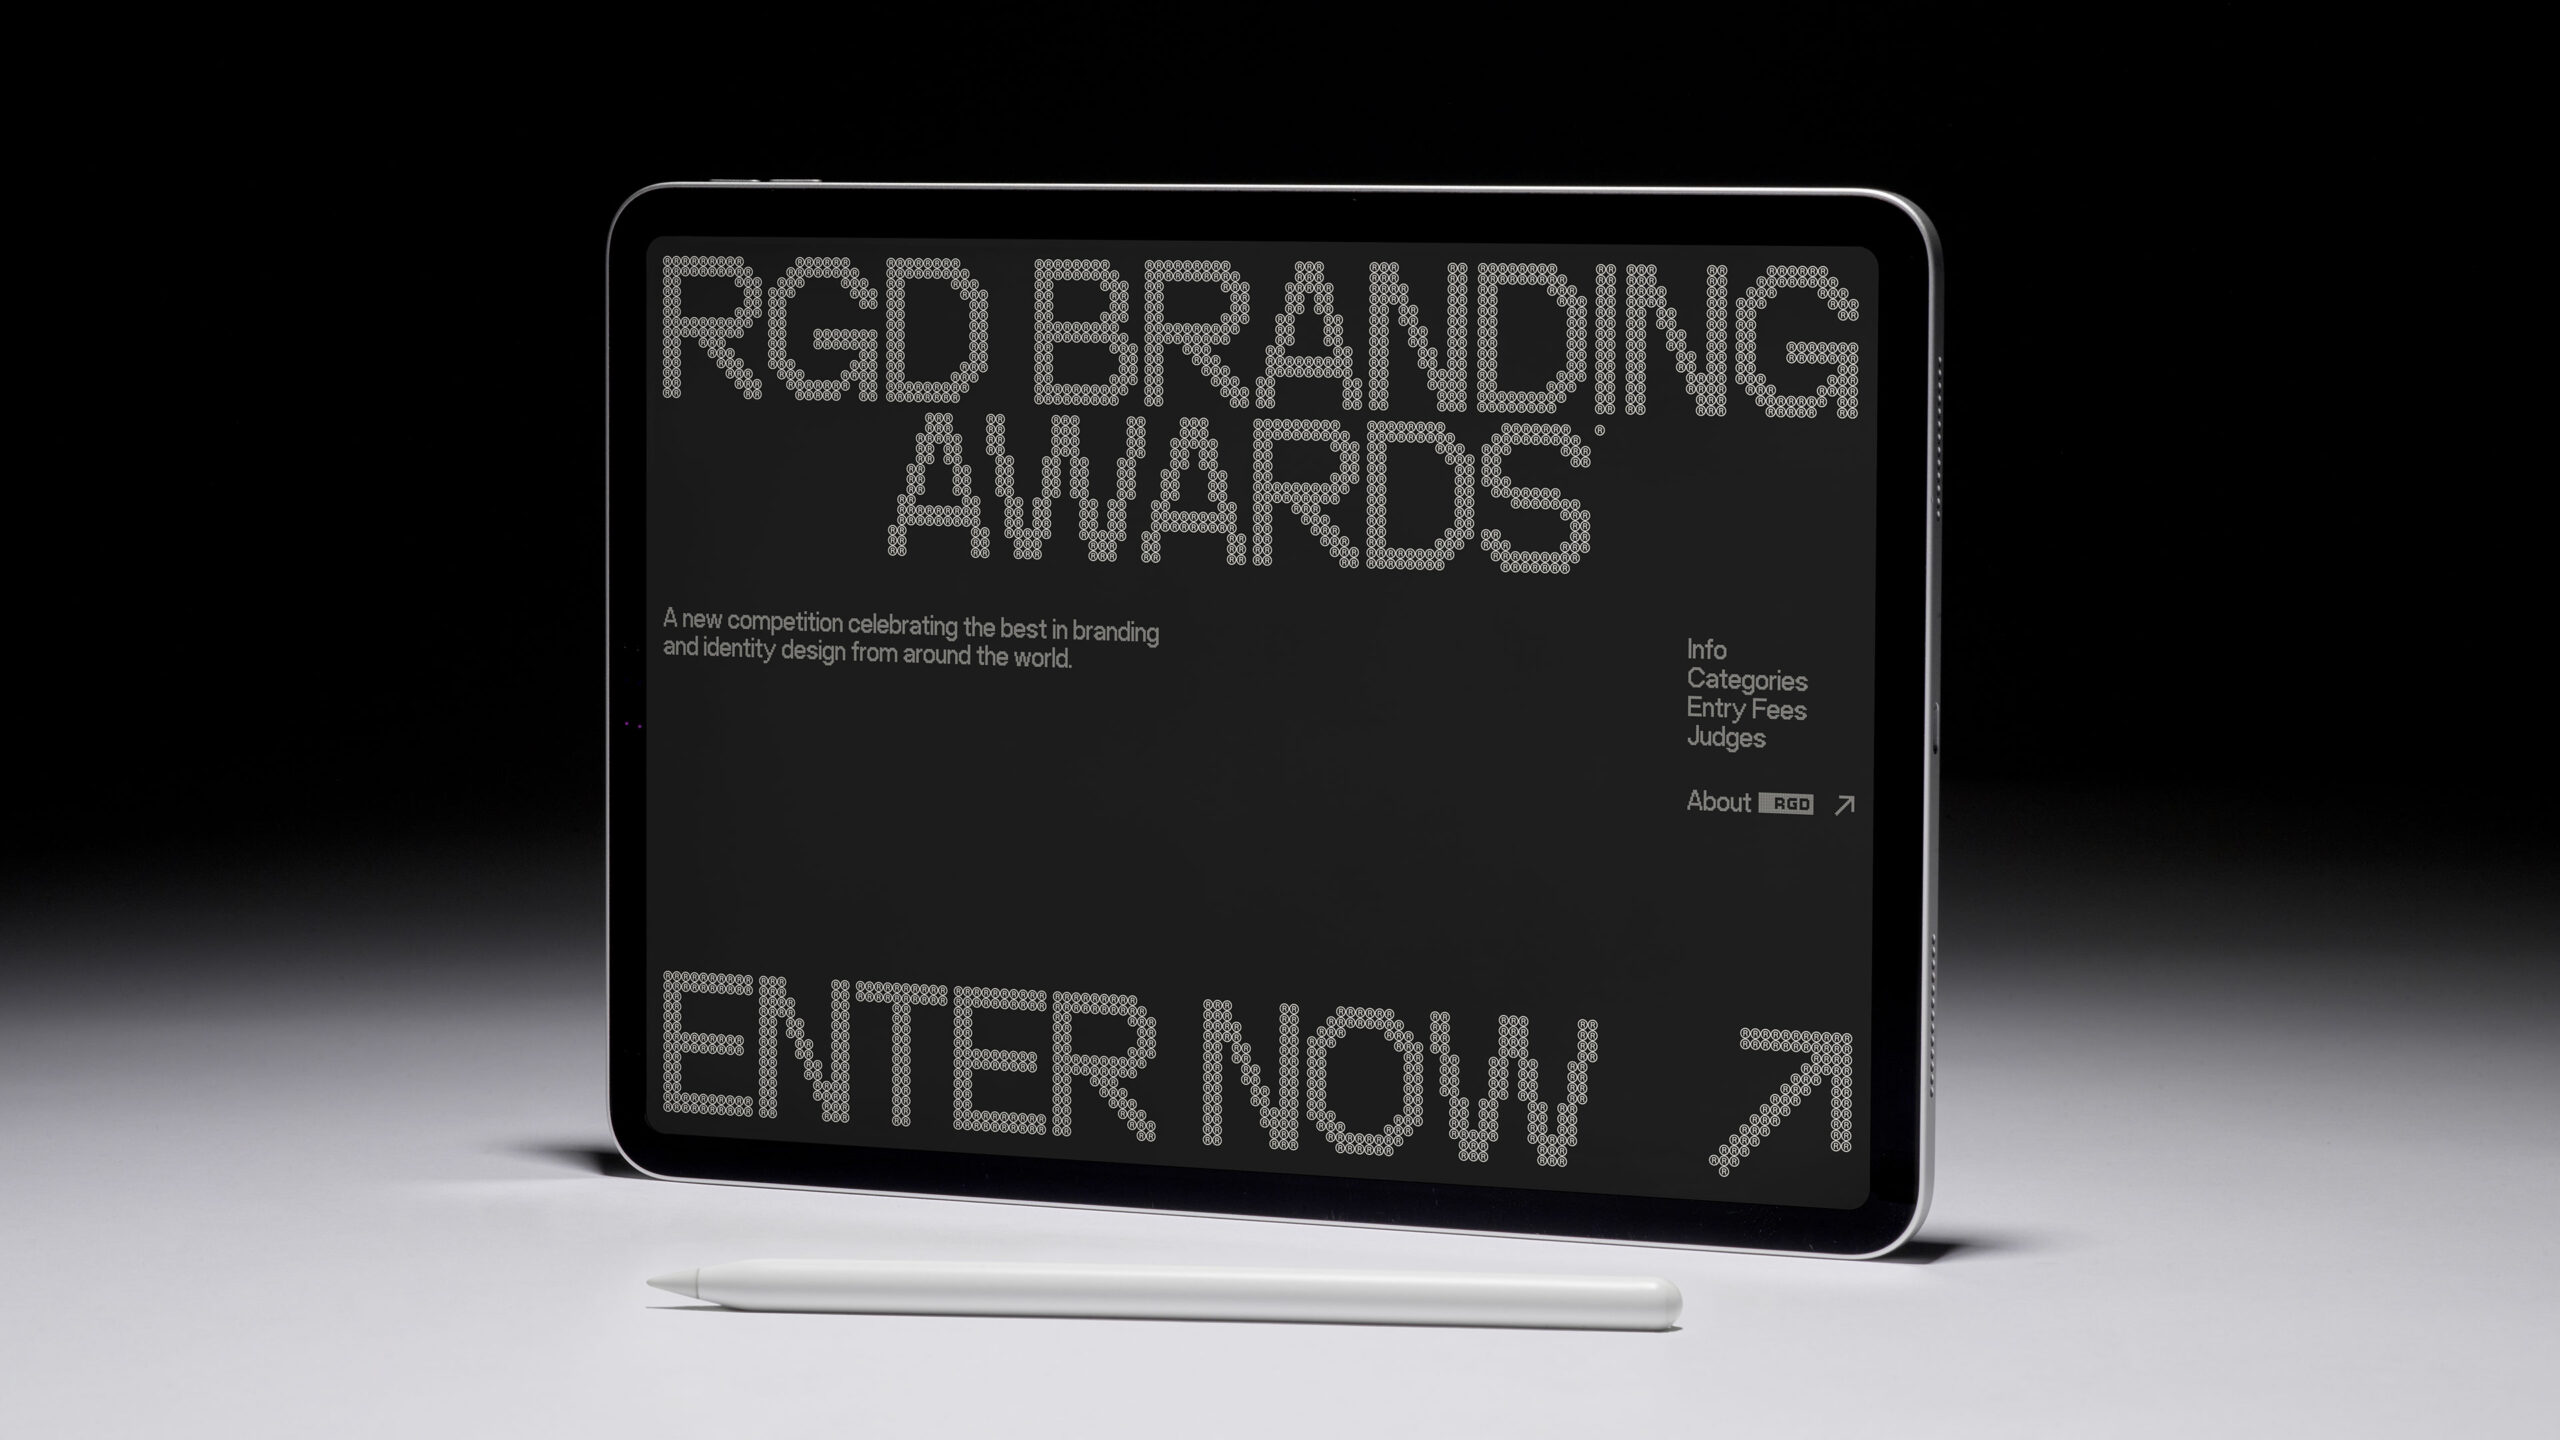 The RGD Branding Awards are open for submissions